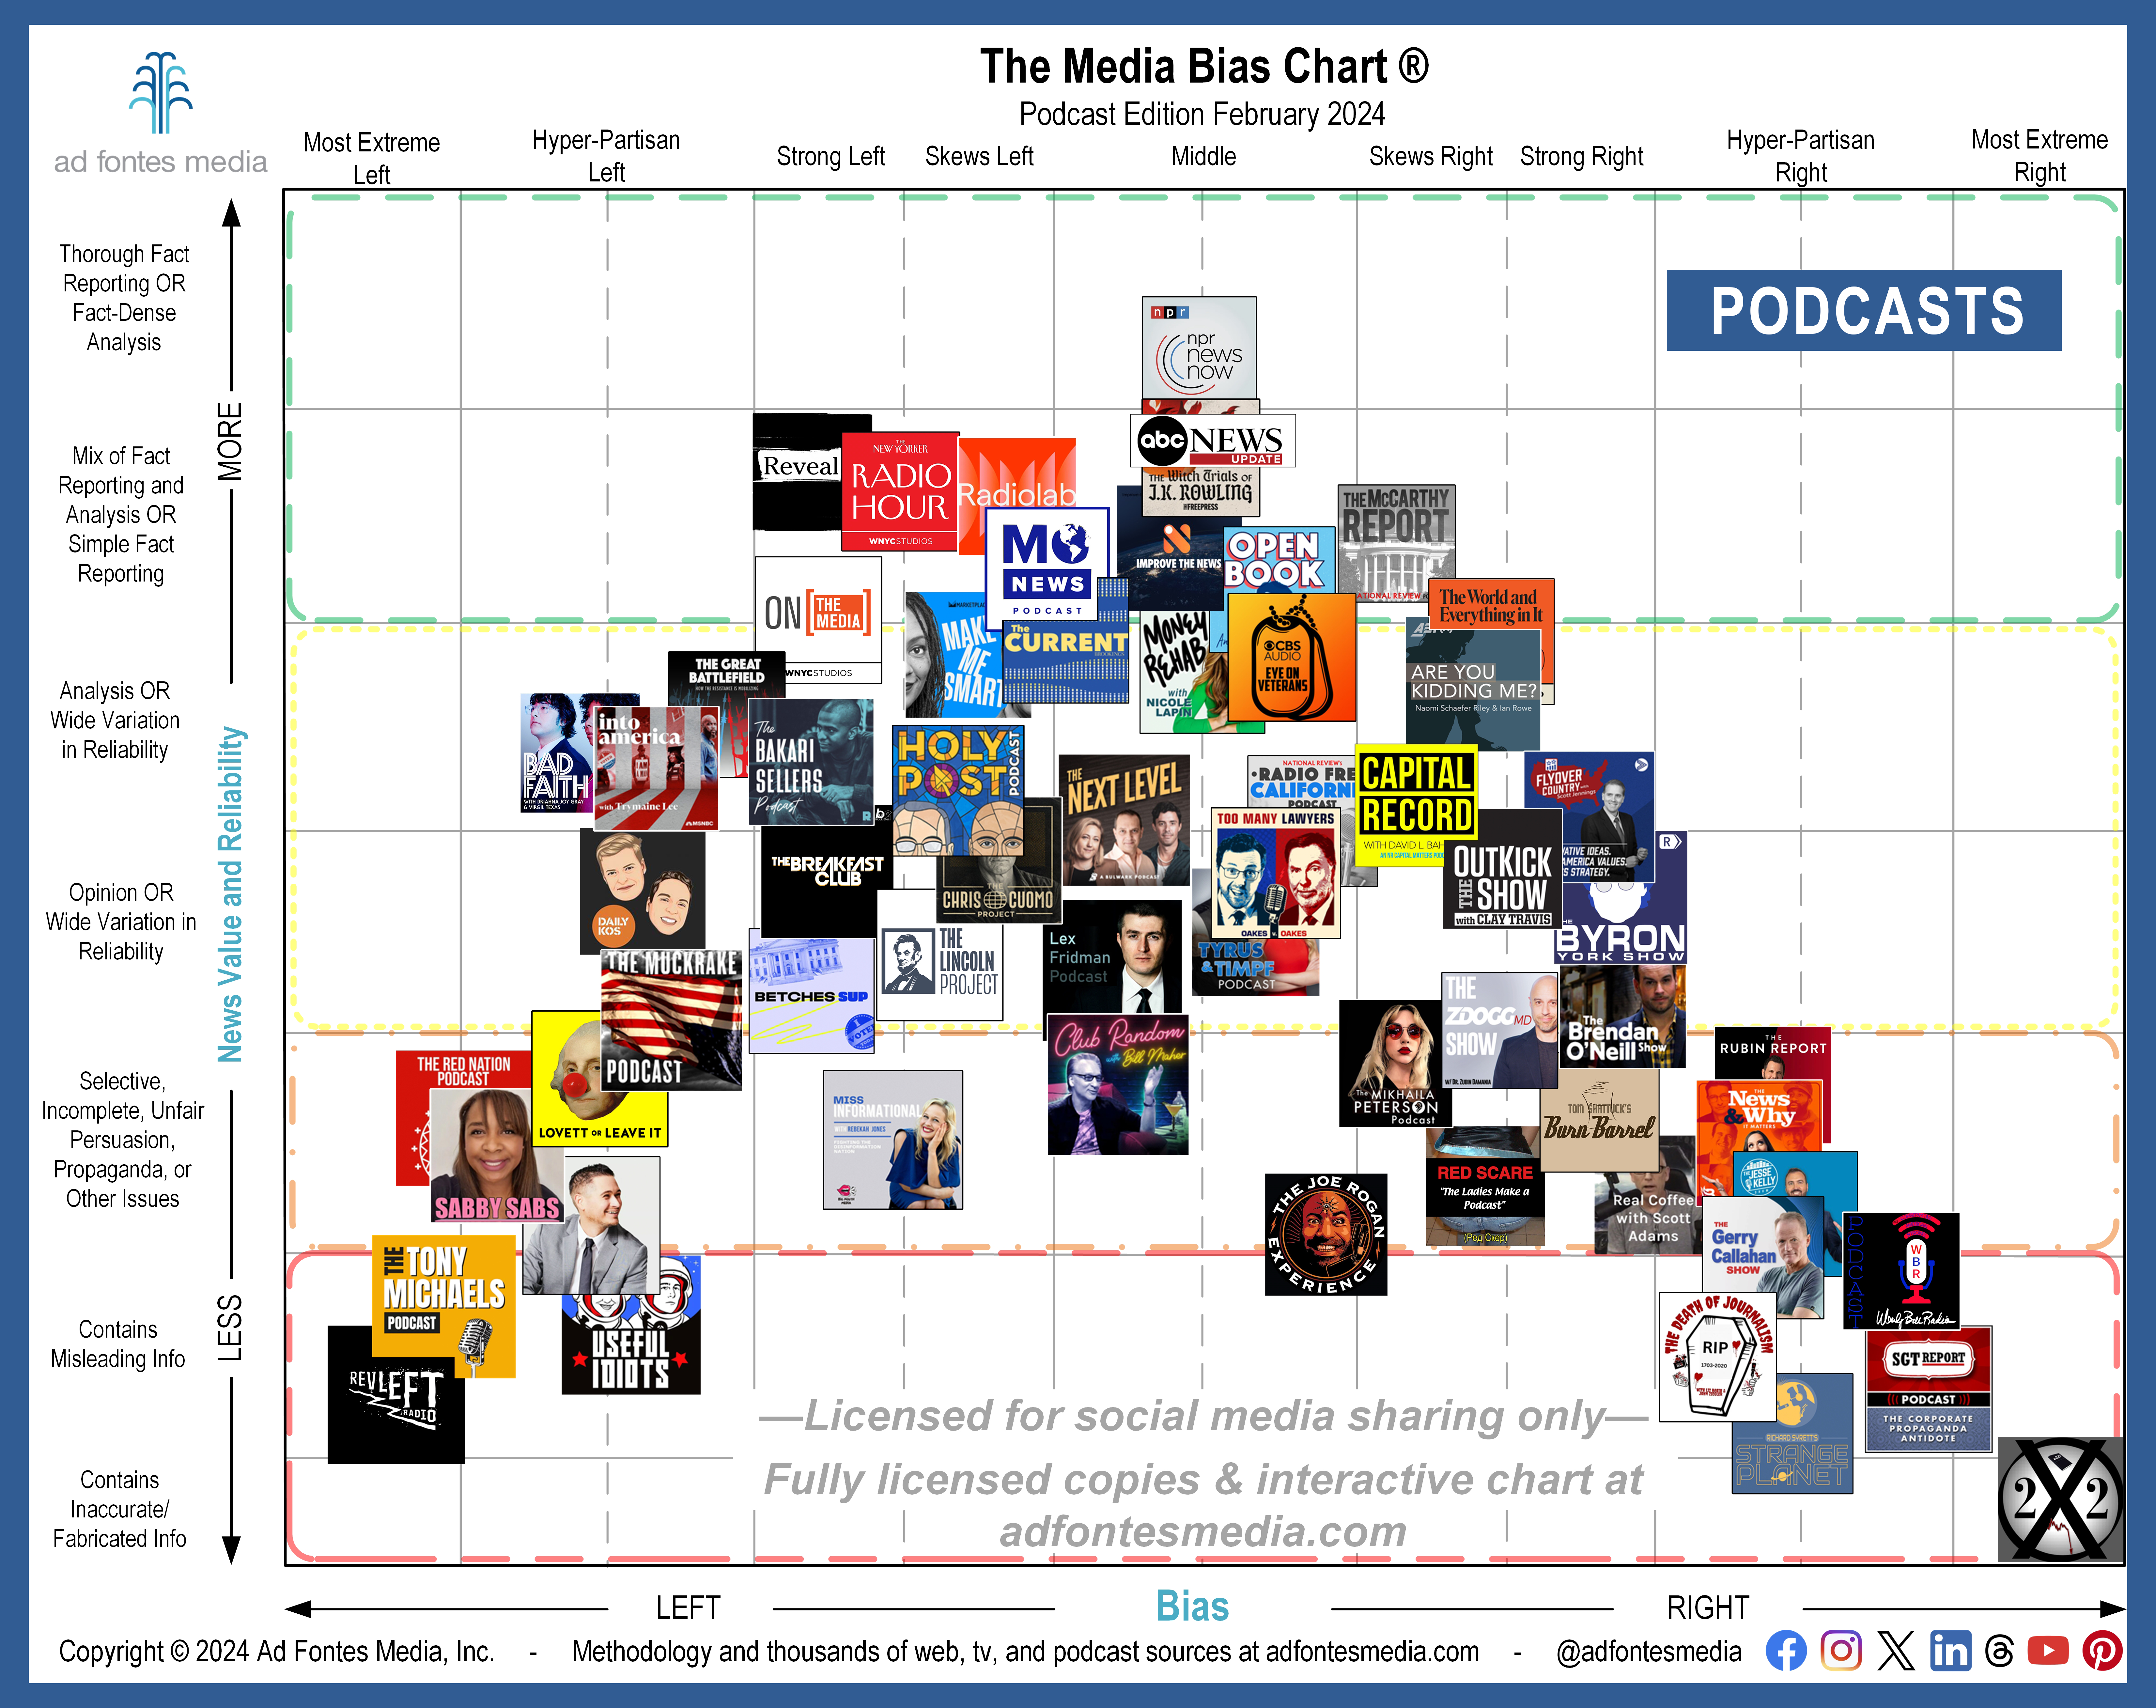 Media Bias Chart features 62 podcasts on its February edition, and 10 of those are included for the first time